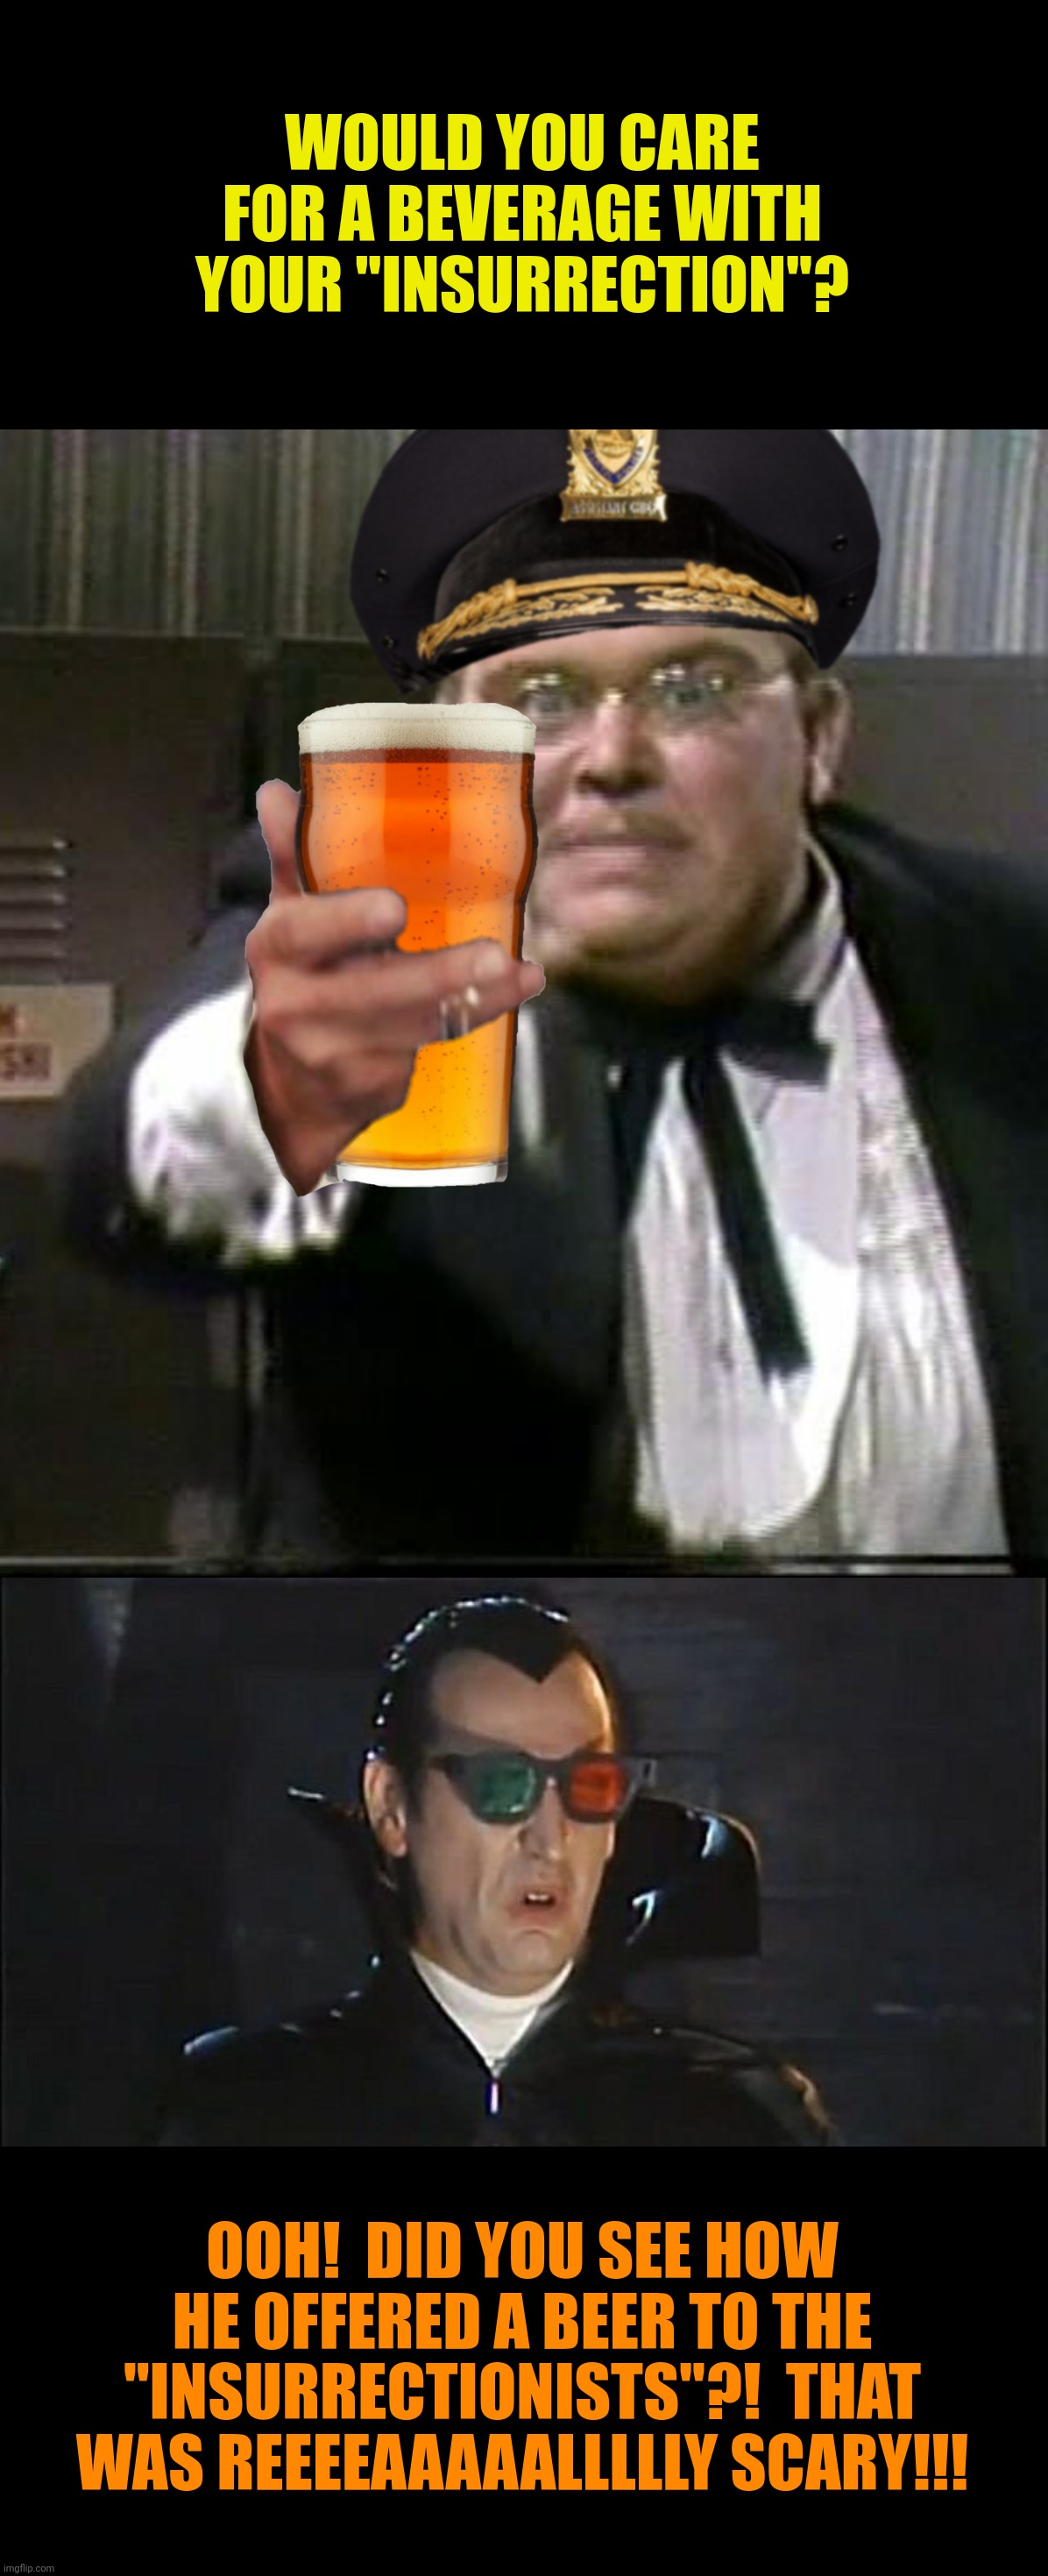 WOULD YOU CARE FOR A BEVERAGE WITH YOUR "INSURRECTION"? OOH!  DID YOU SEE HOW HE OFFERED A BEER TO THE "INSURRECTIONISTS"?!  THAT WAS REEEEA | made w/ Imgflip meme maker